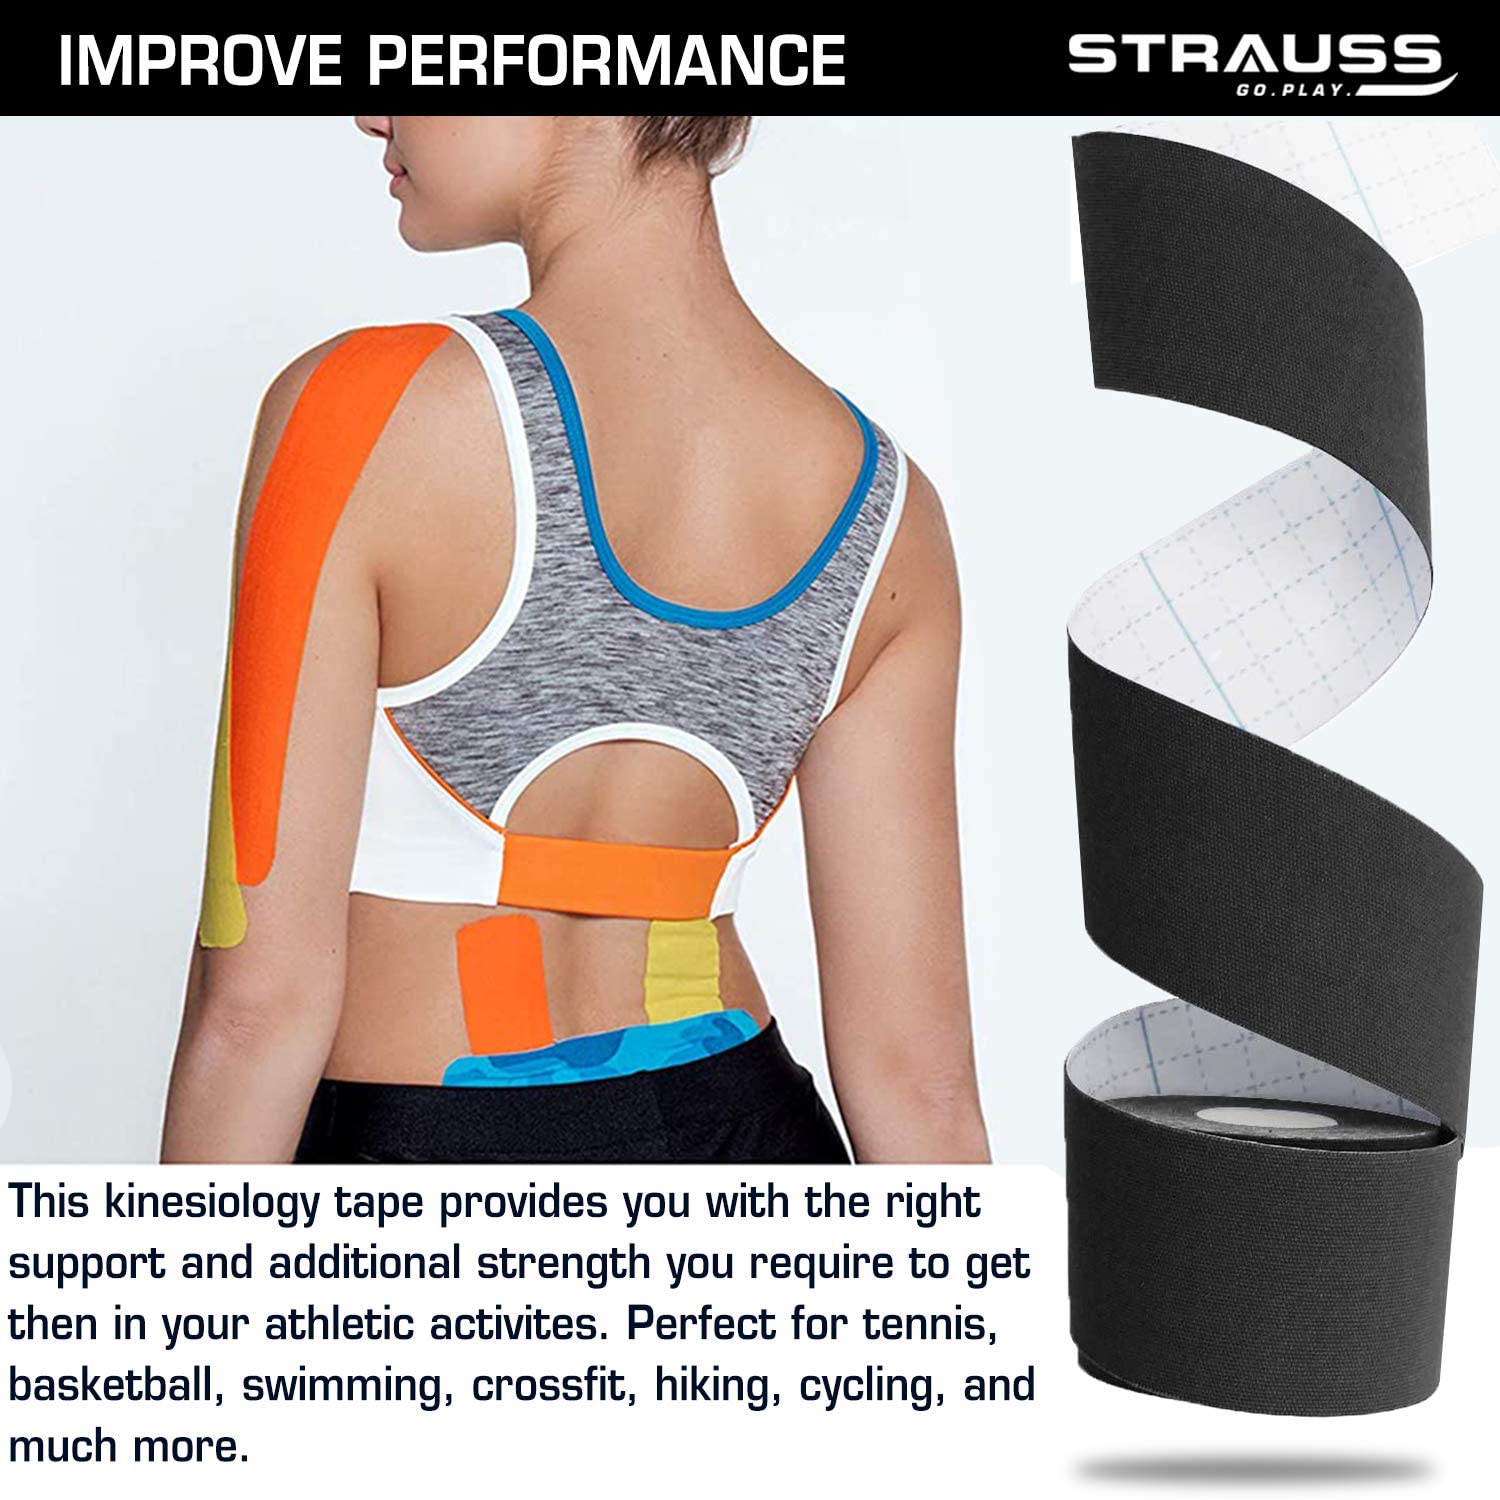 Strauss Kinesiology Sports Tape Knee, Calf & Thigh Support (Black)